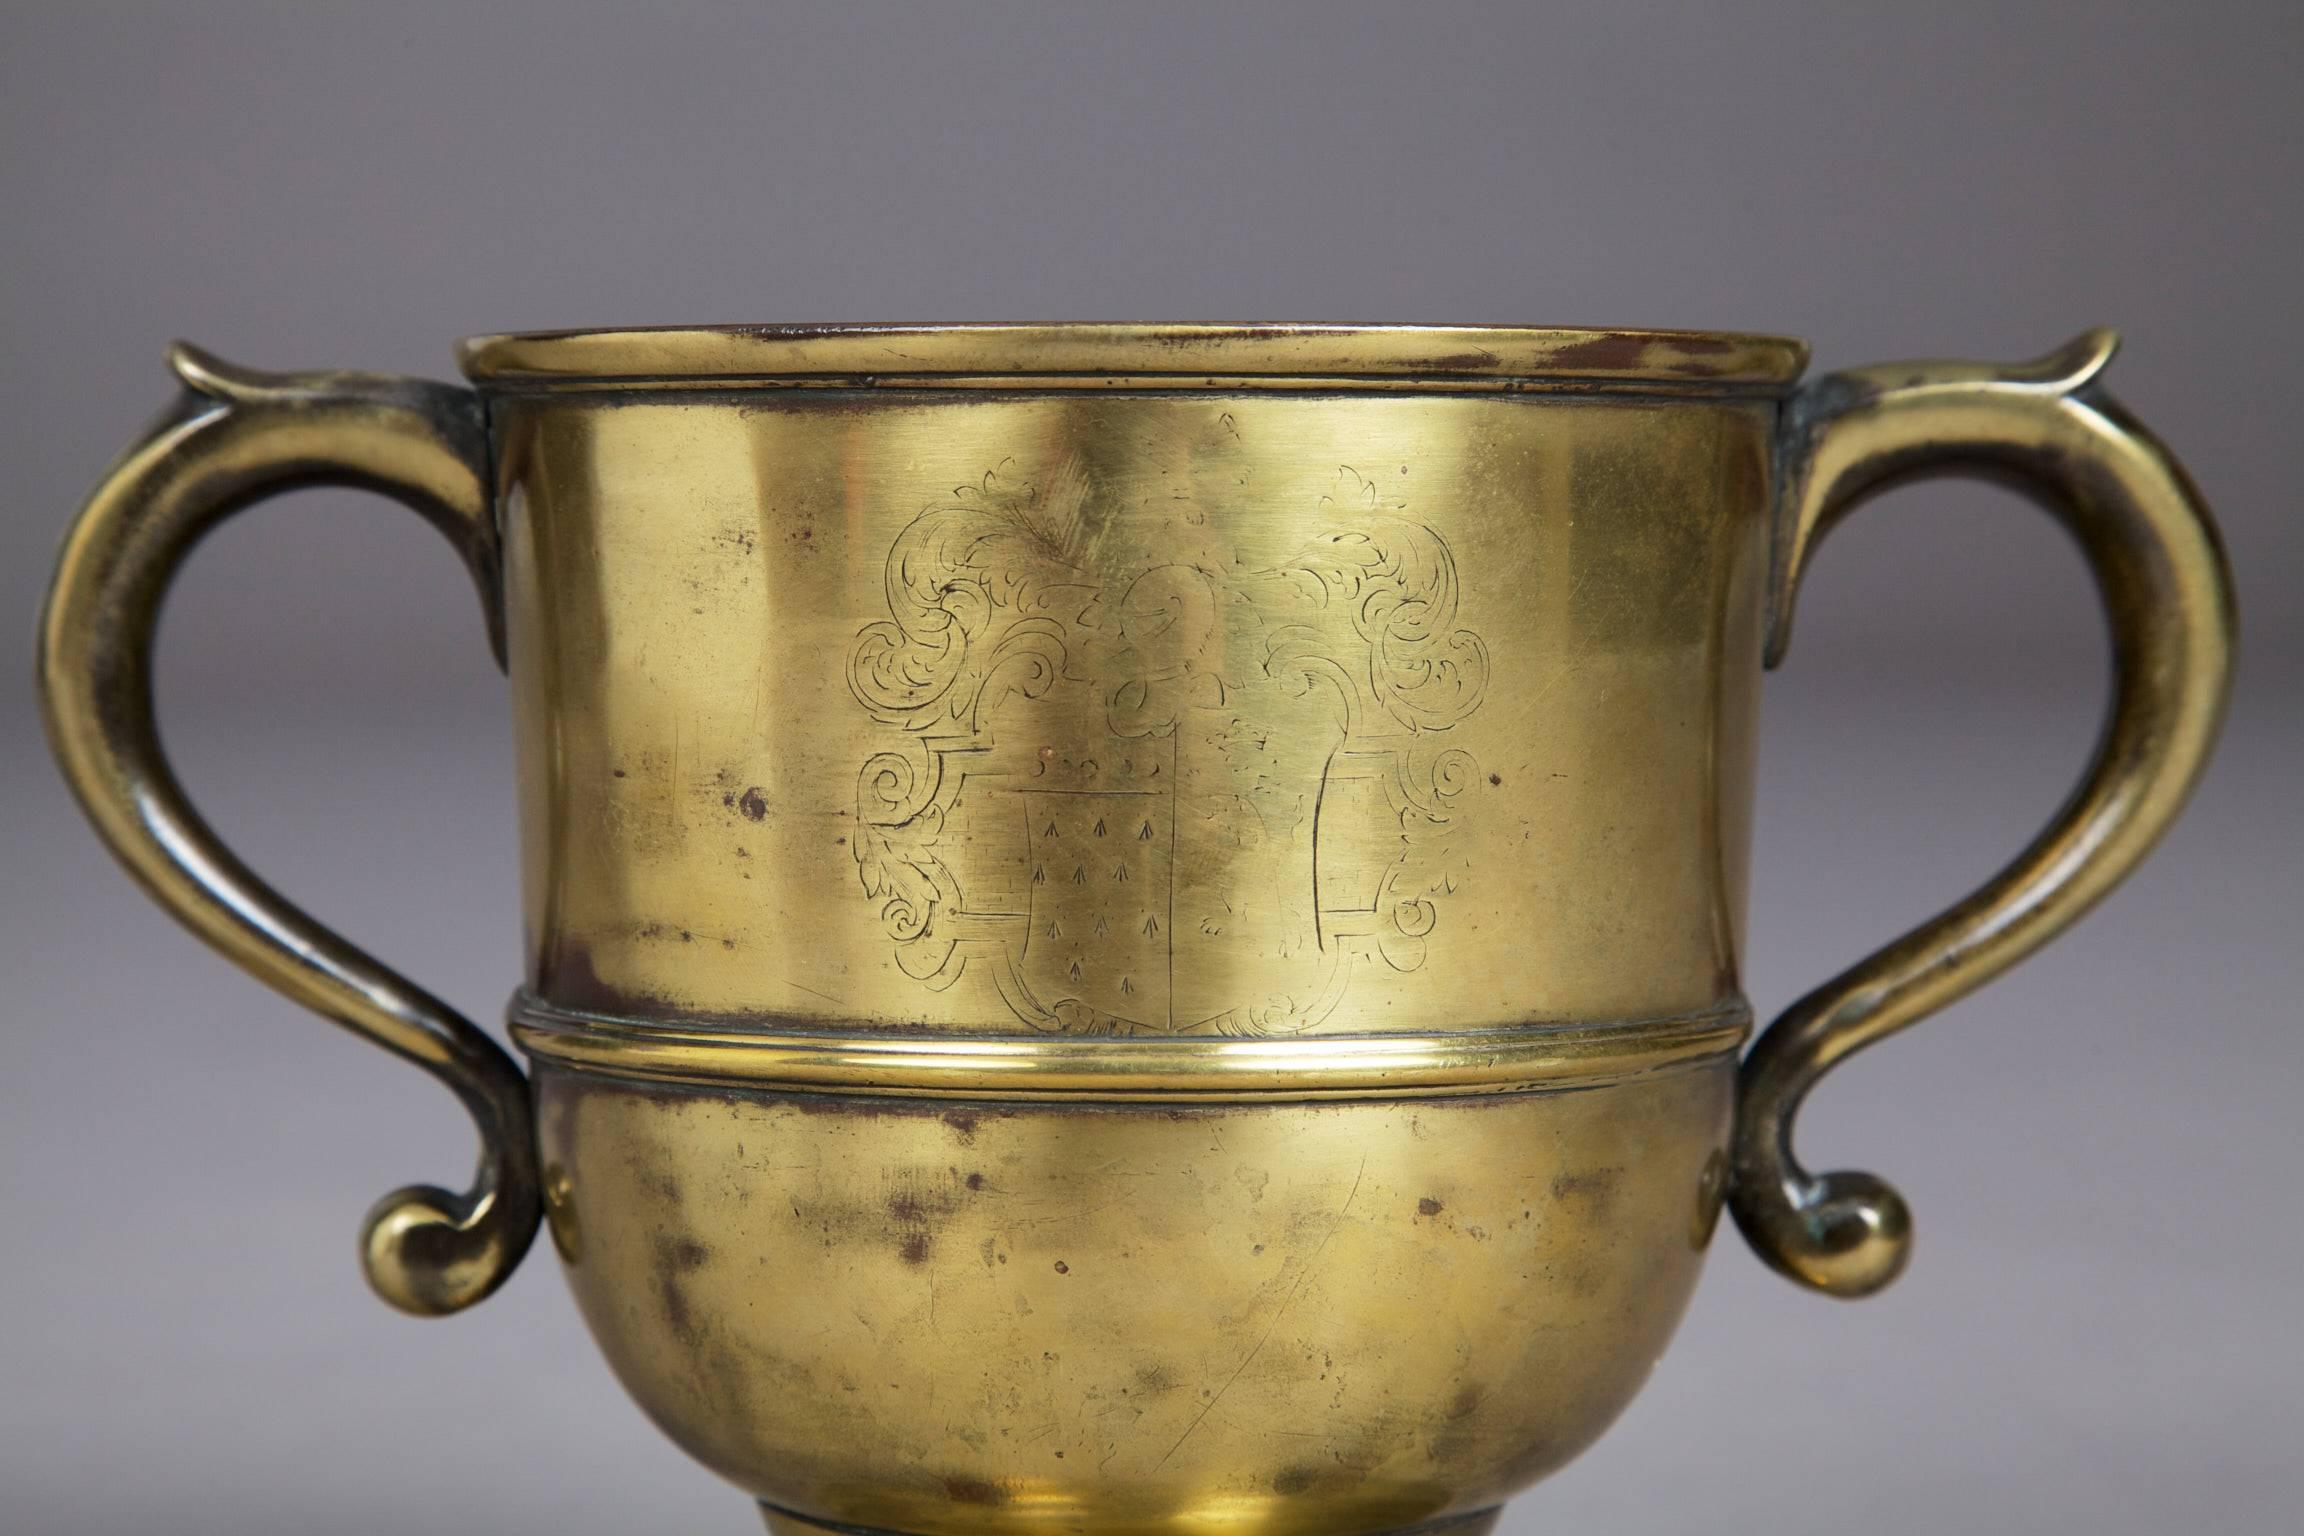 Early 18th century English brass loving cup

The twin handled loving cup engraved with the Arms of the Westons of Sutton Place, Surrey. The cup was originally silver plated, now cleaned, still with traces of original silvering. 

Sutton Place,